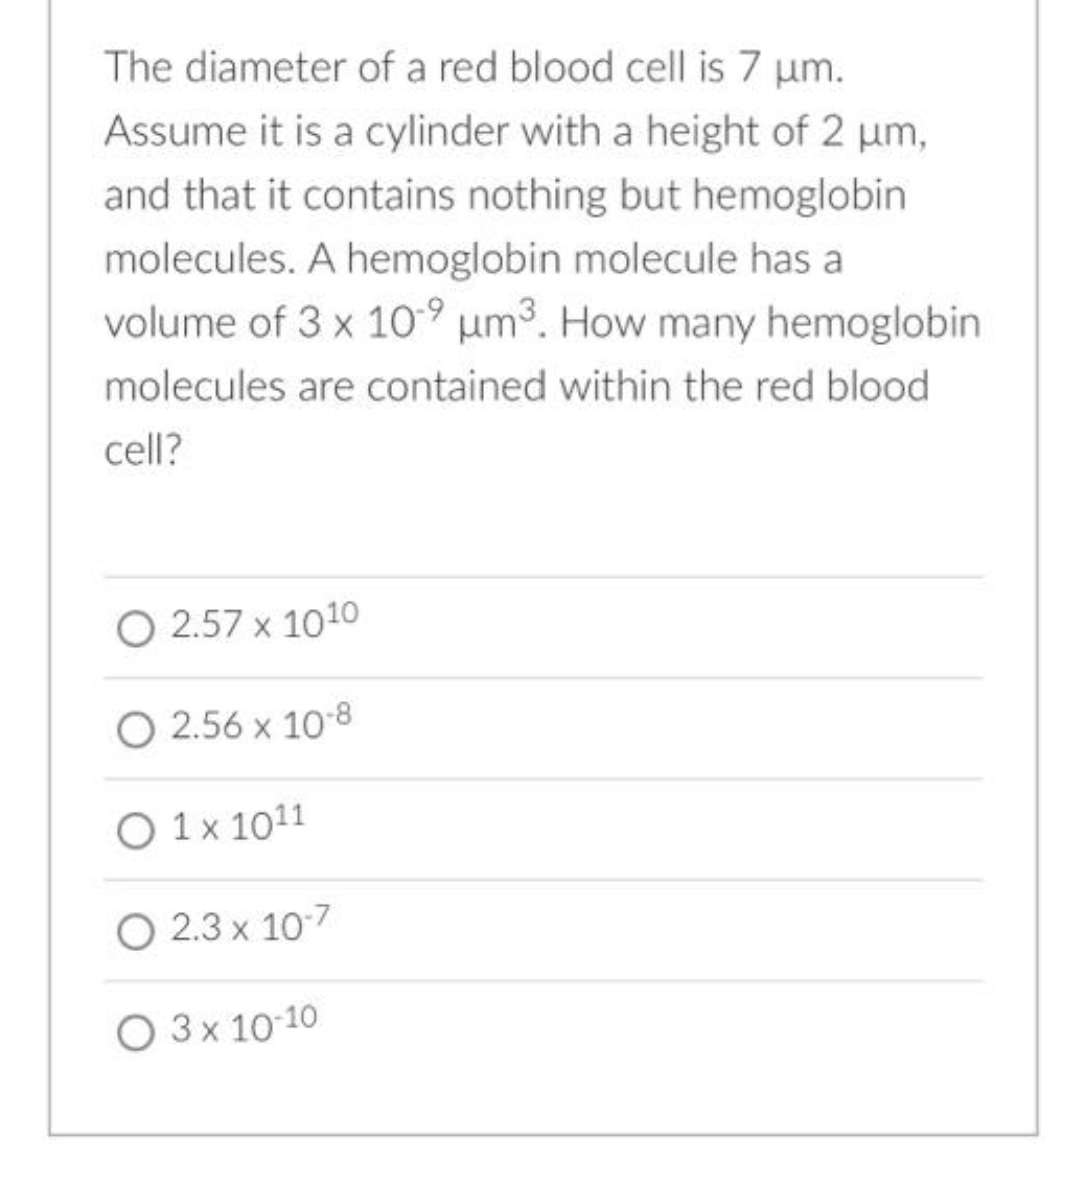 The diameter of a red blood cell is 7 um.
Assume it is a cylinder with a height of 2 um,
and that it contains nothing but hemoglobin
molecules. A hemoglobin molecule has a
volume of 3 x 10° µm³. How many hemoglobin
molecules are contained within the red blood
cell?
O 2.57 x 1010
O 2.56 x 10-8
O 1 x 1011
O 2.3 x 107
O 3x 10 10
